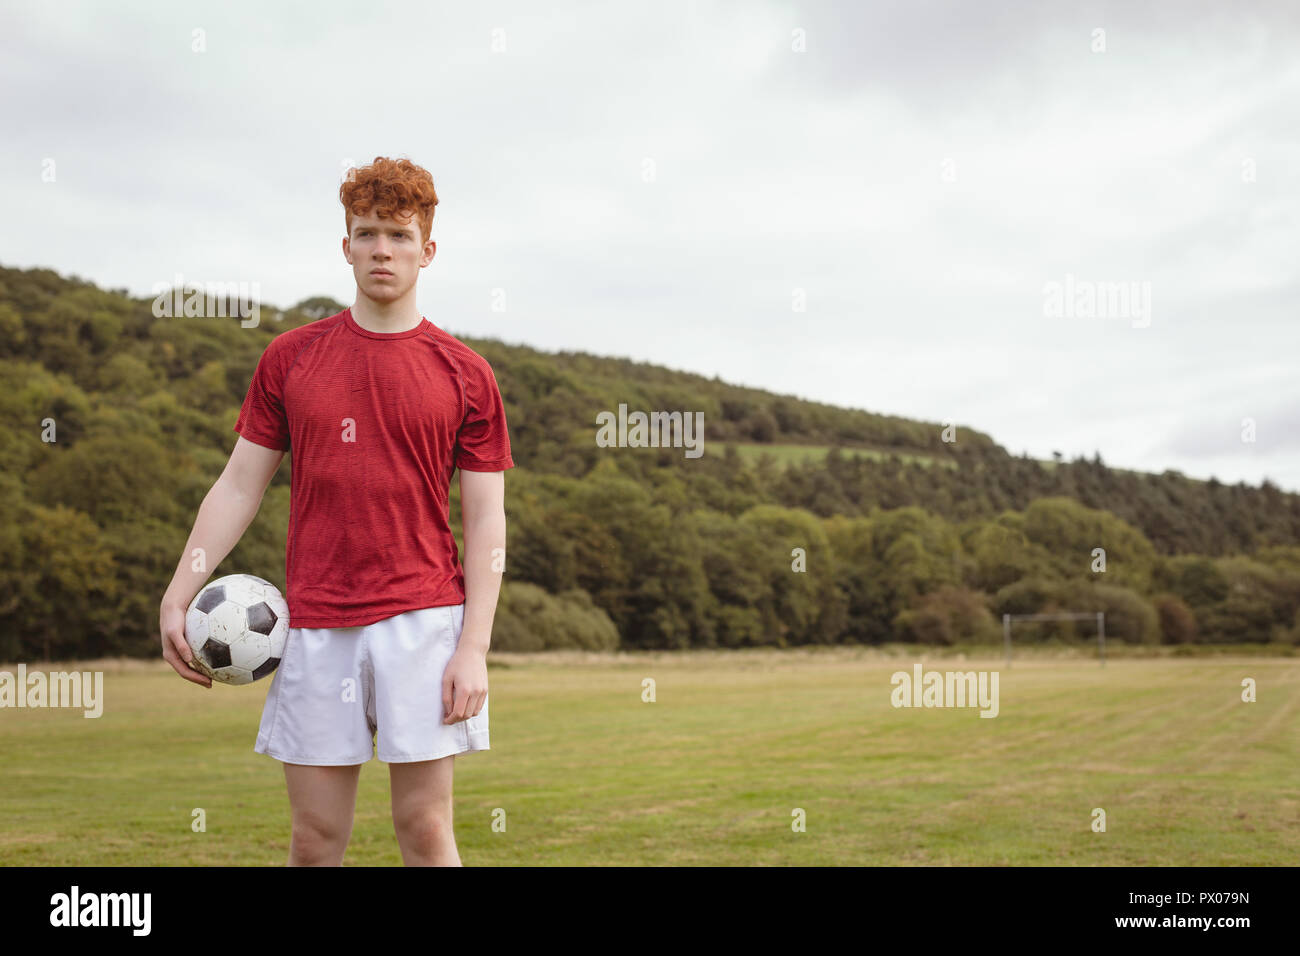 Football player standing with soccer ball in the field Stock Photo